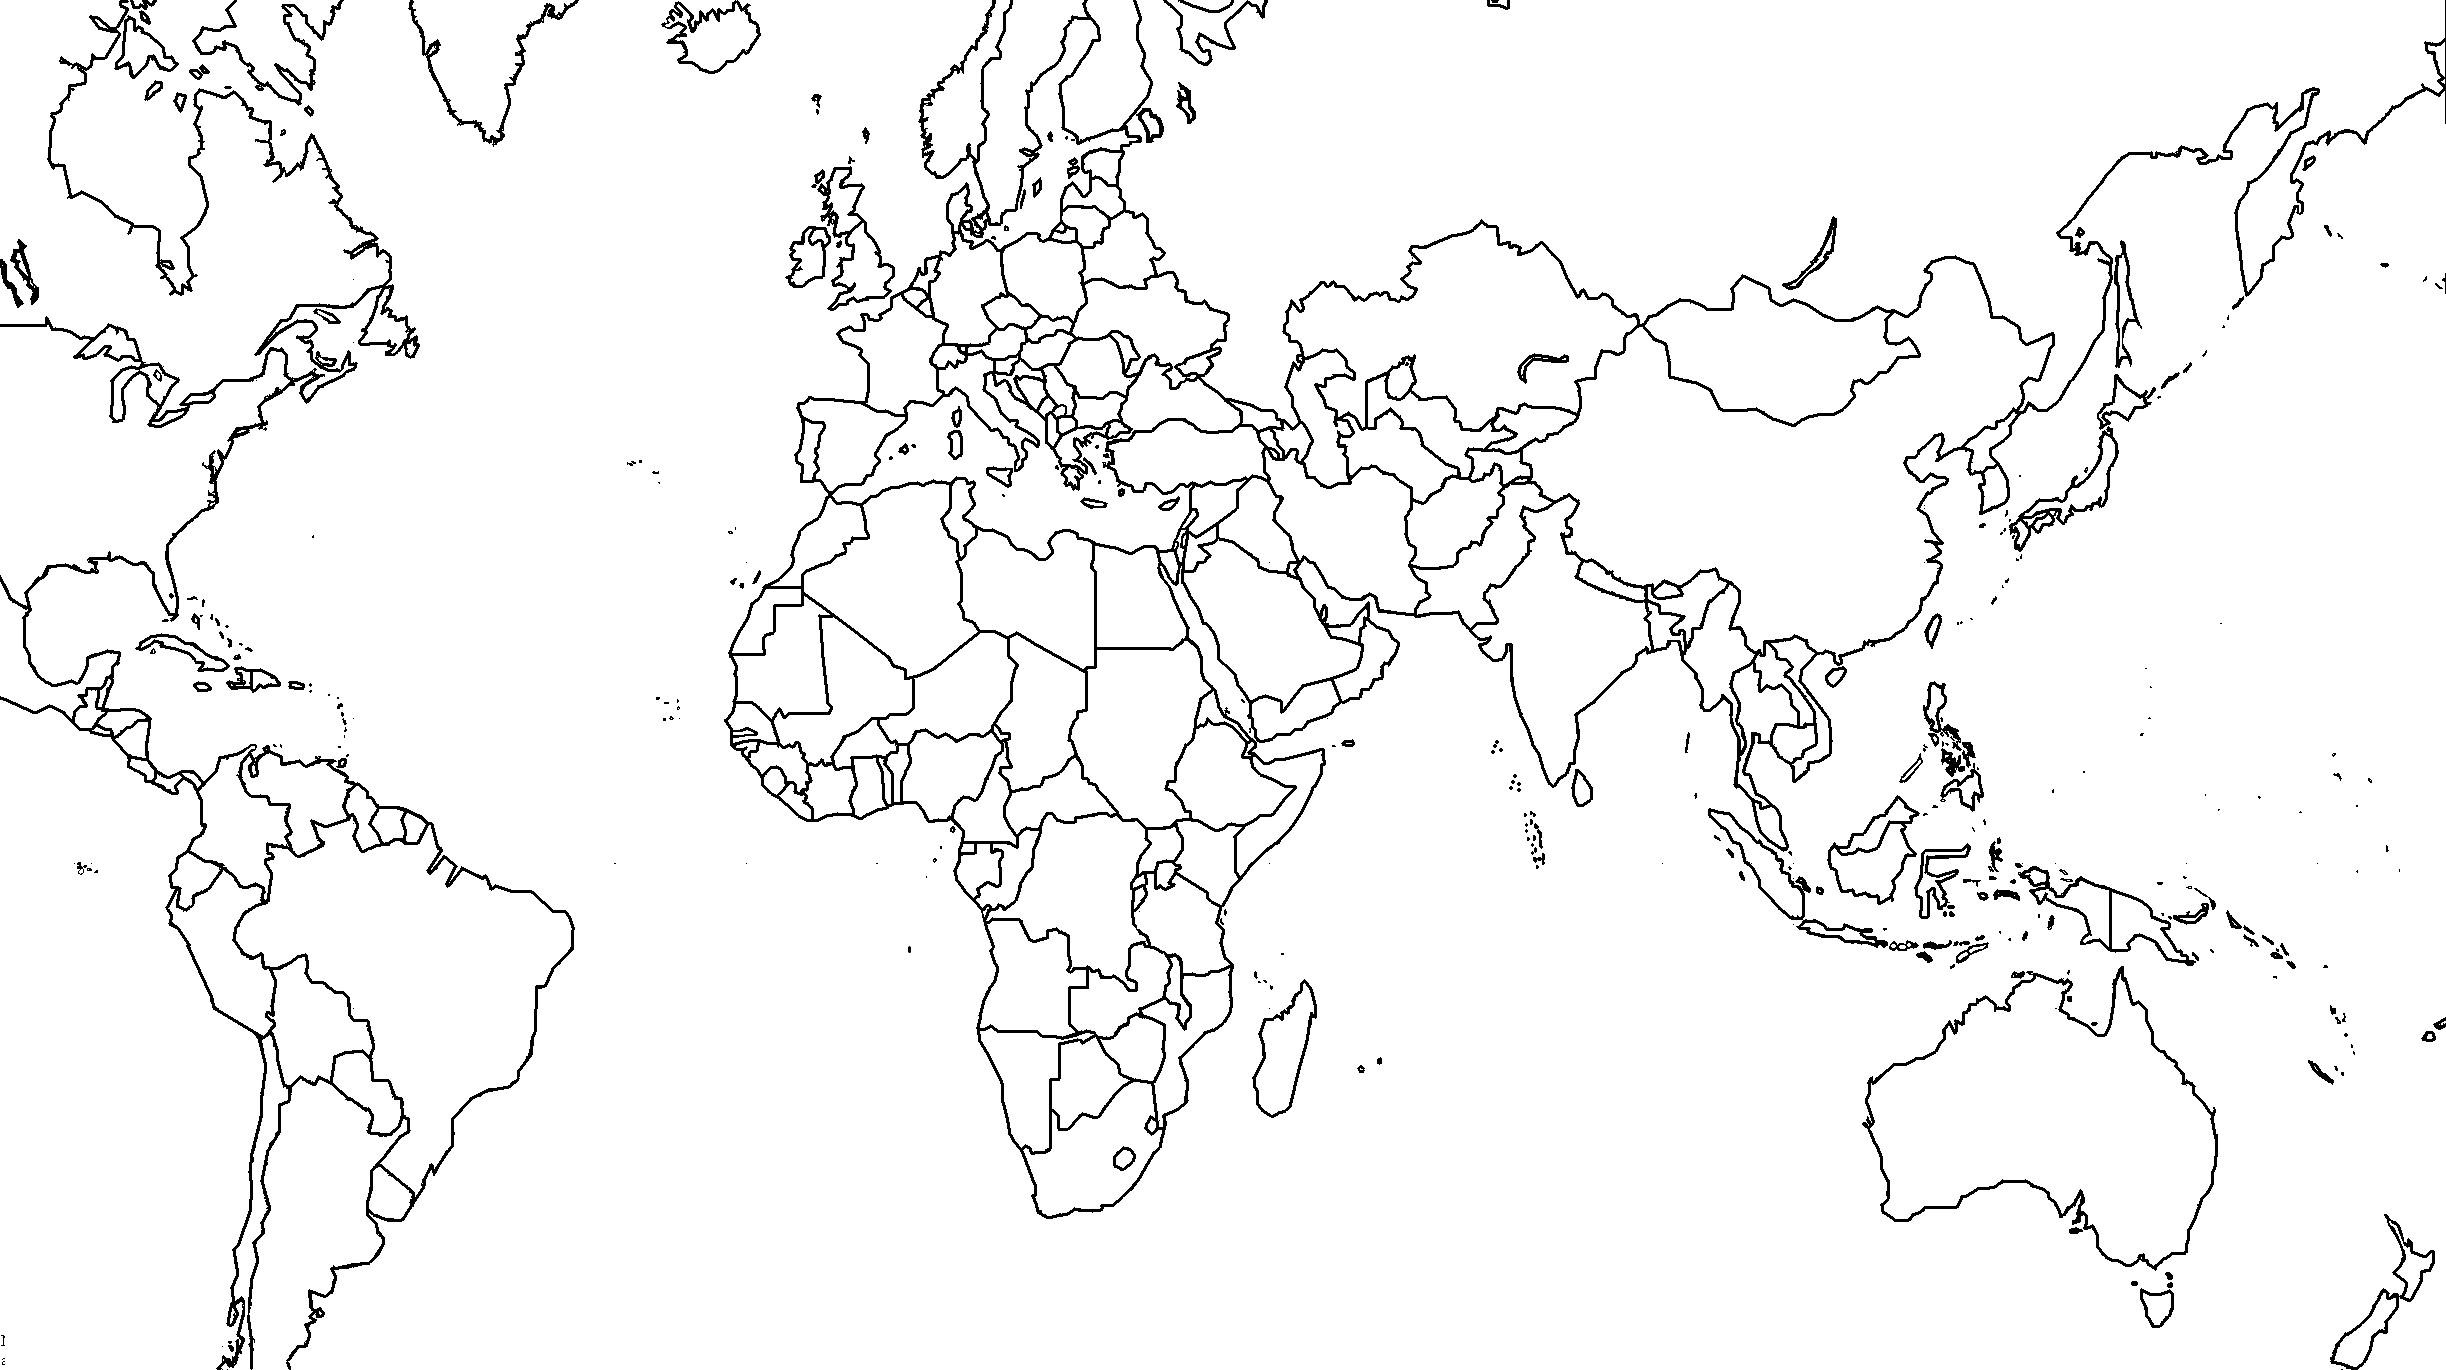 Blank World Map With Countries